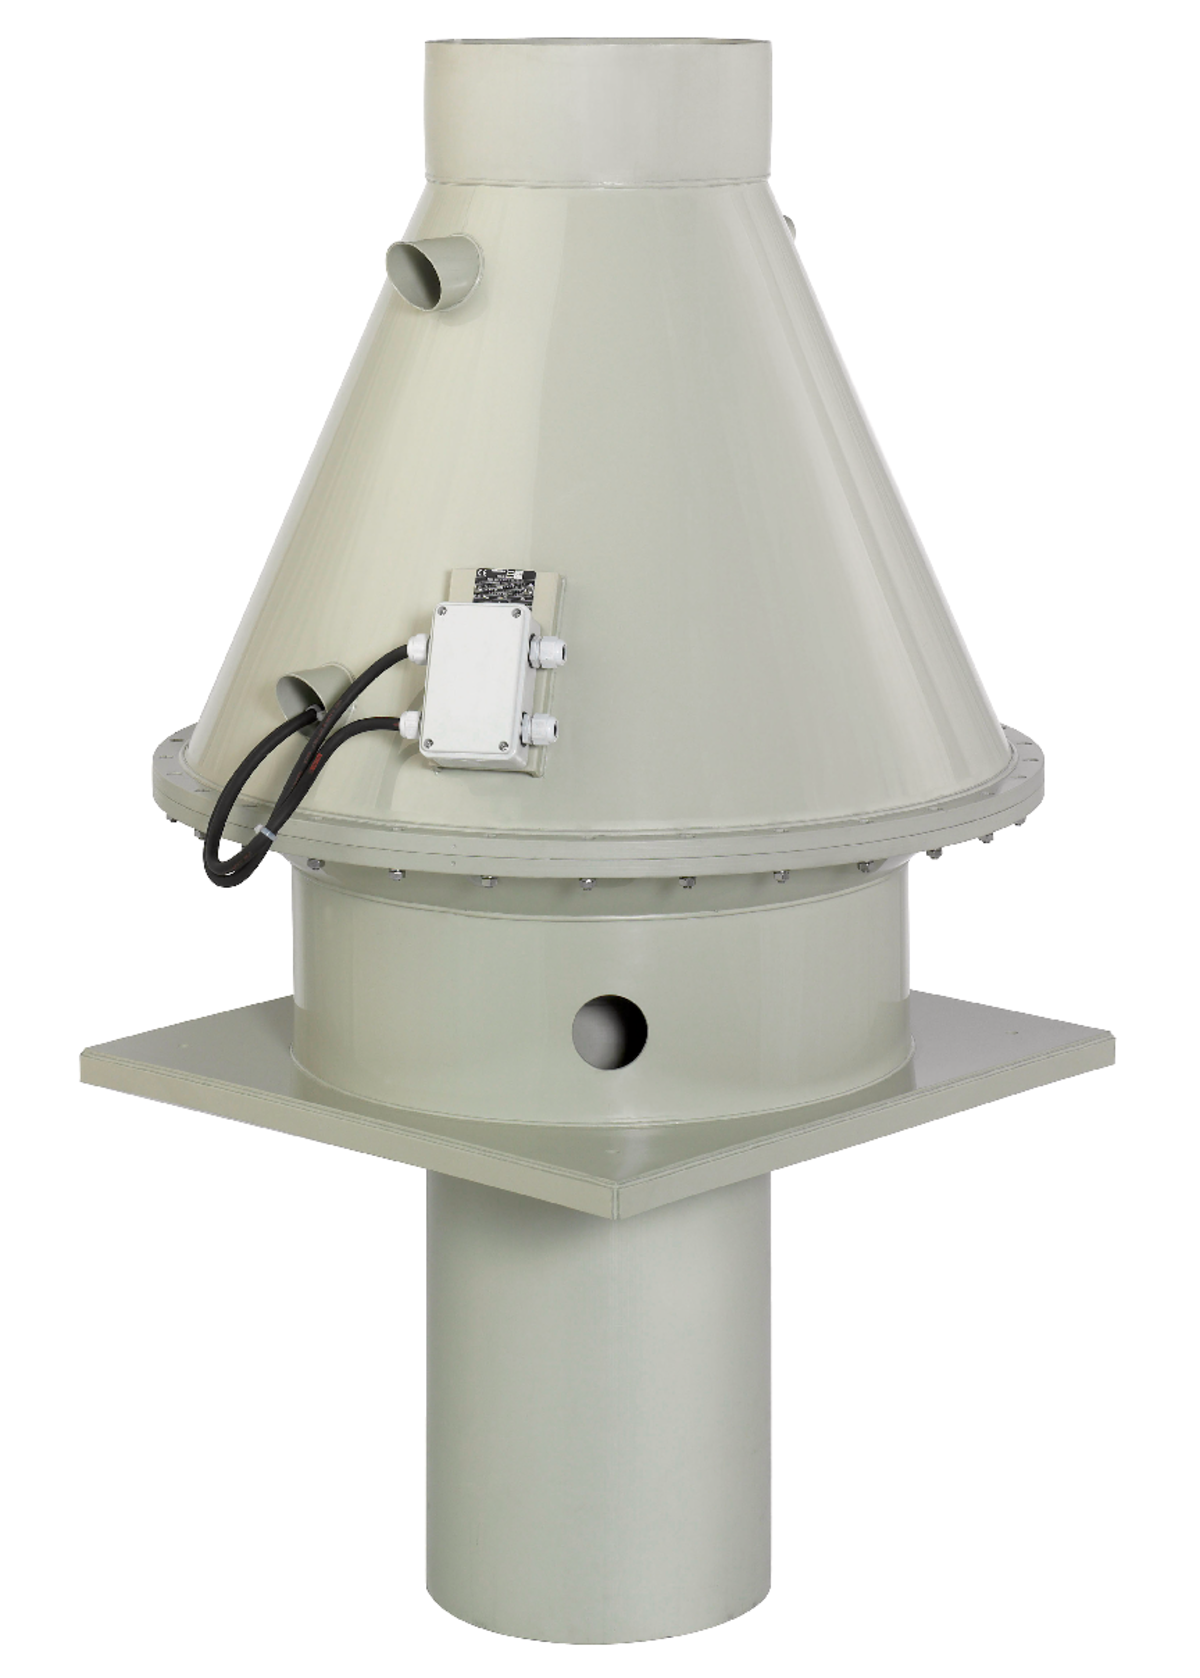 DVP - Roof Fans - Fans - Products - Systemair